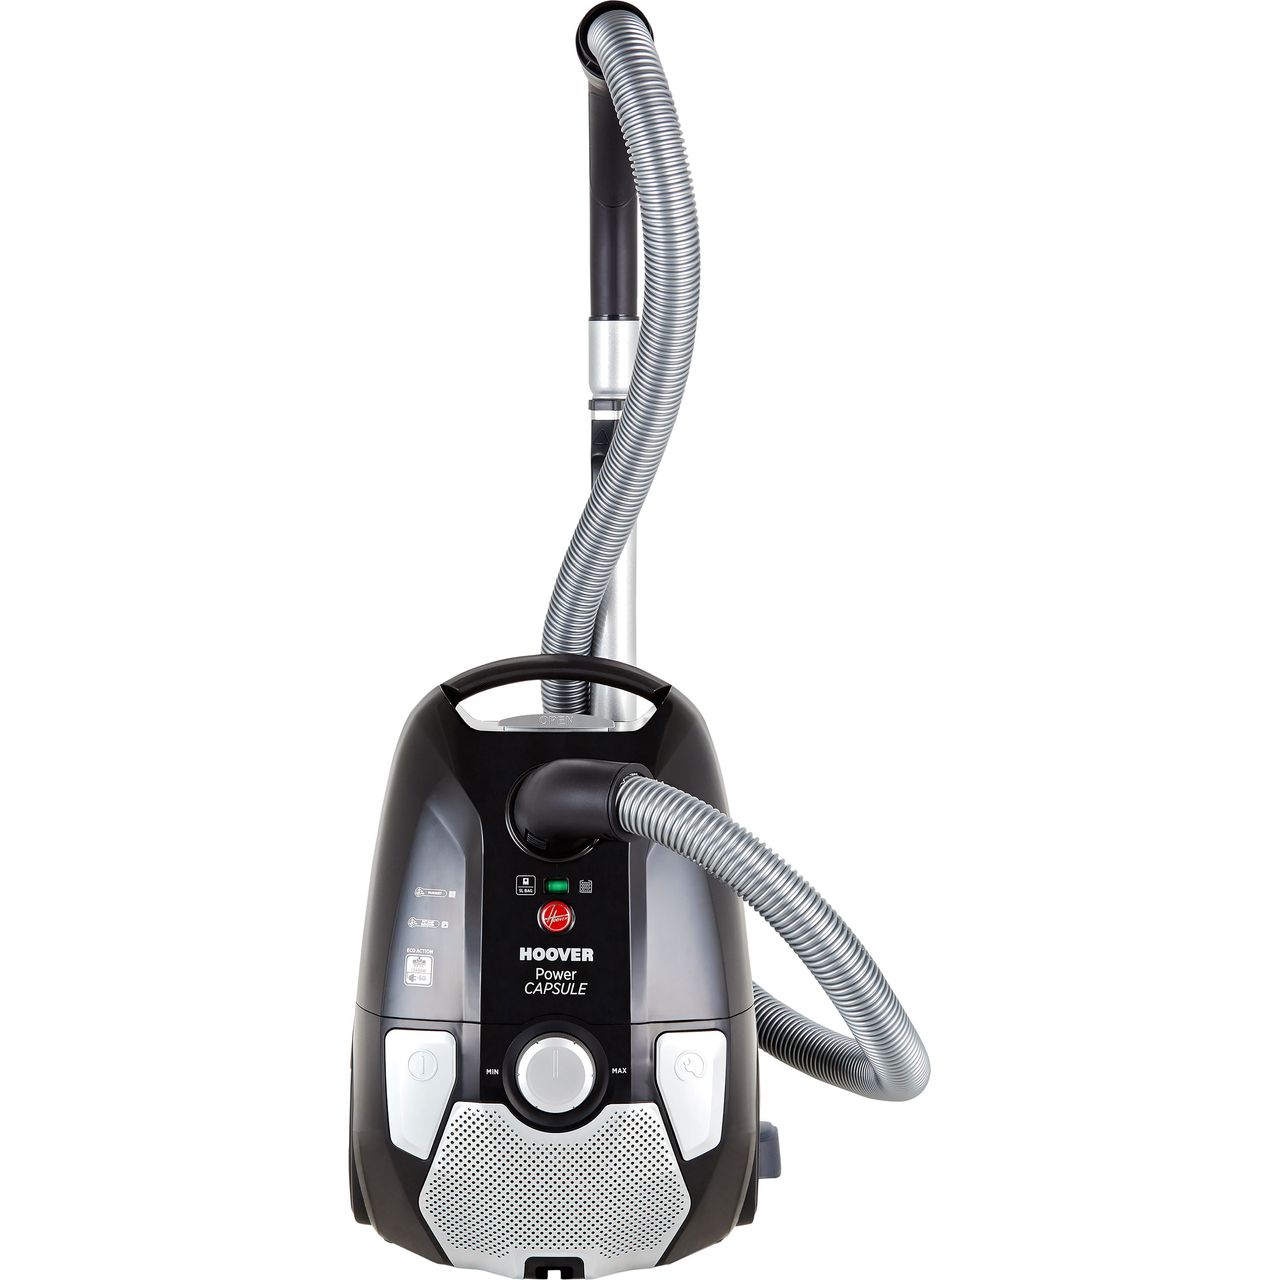 Hoover POWER CAPSULE PC20PET Cylinder Vacuum Cleaner with Pet Hair Removal Review